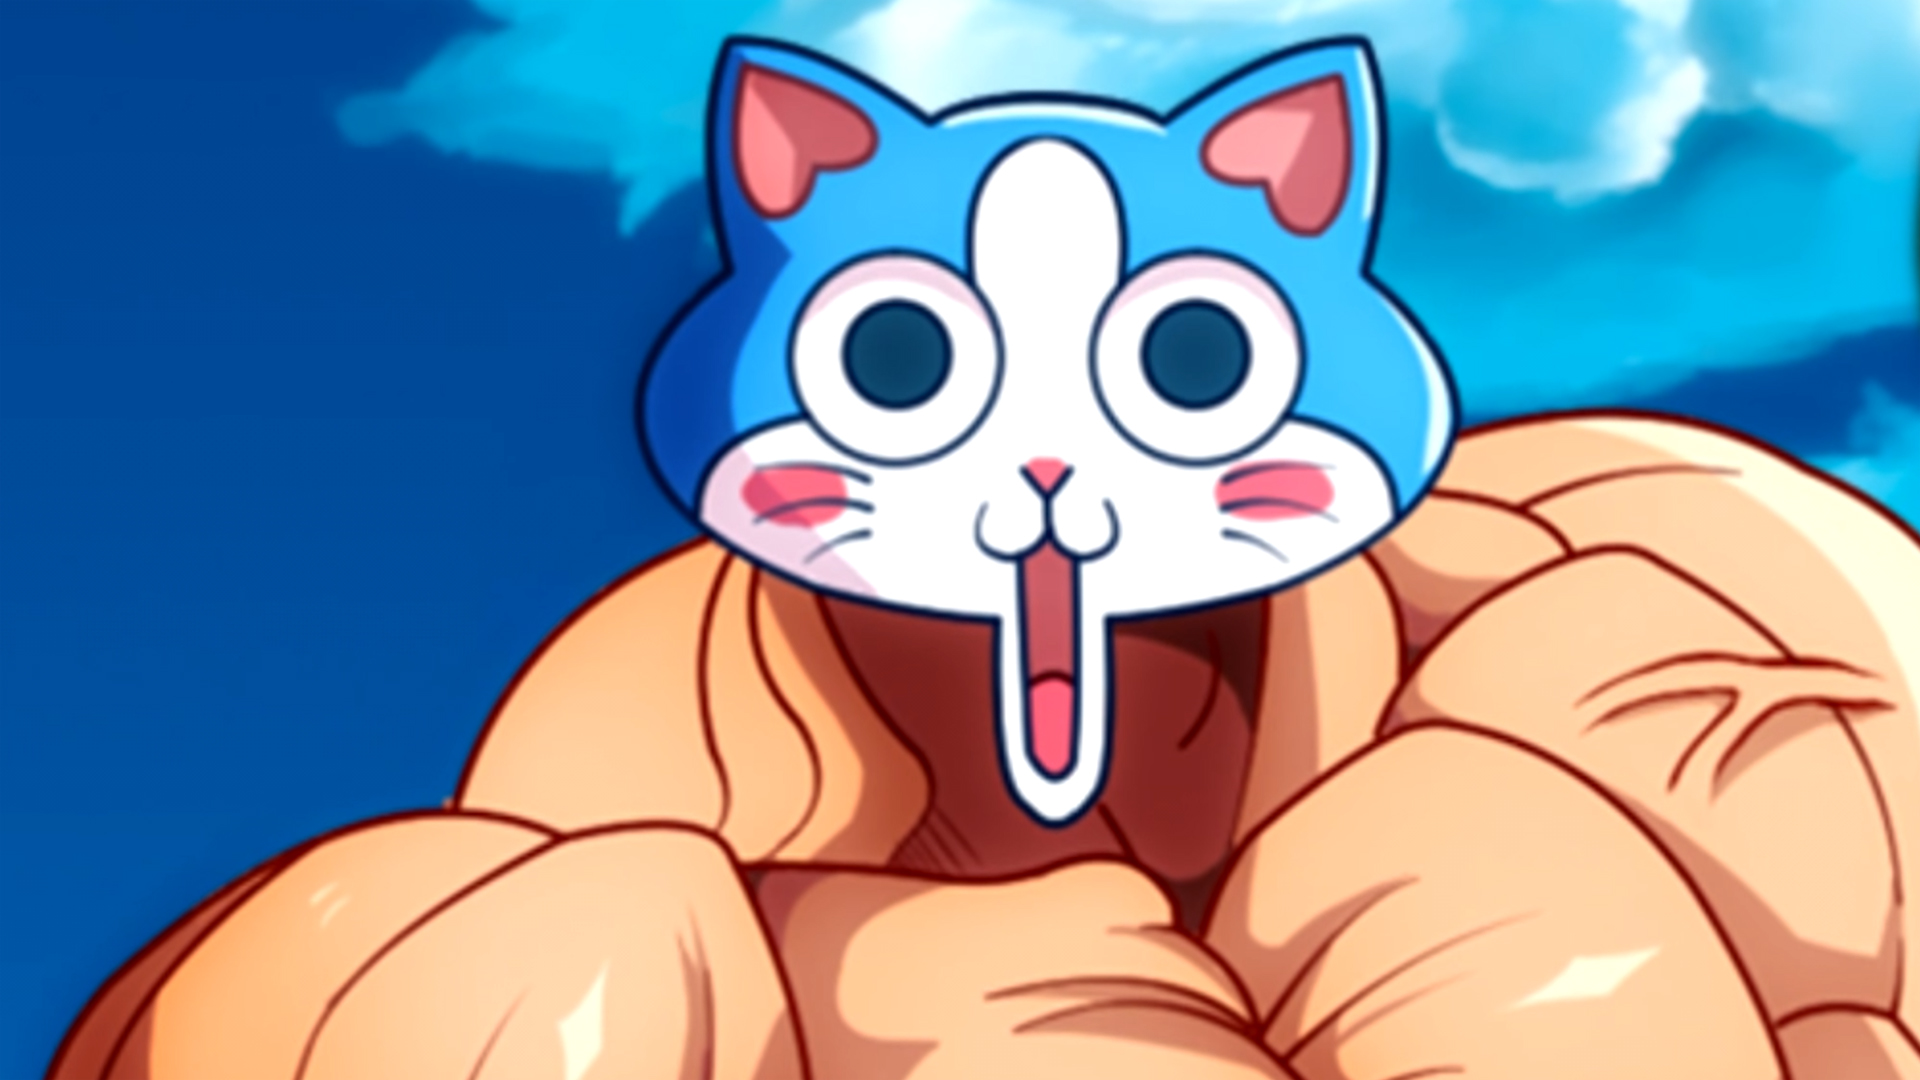 Solo developer drops muscular cat game on the way to hospital